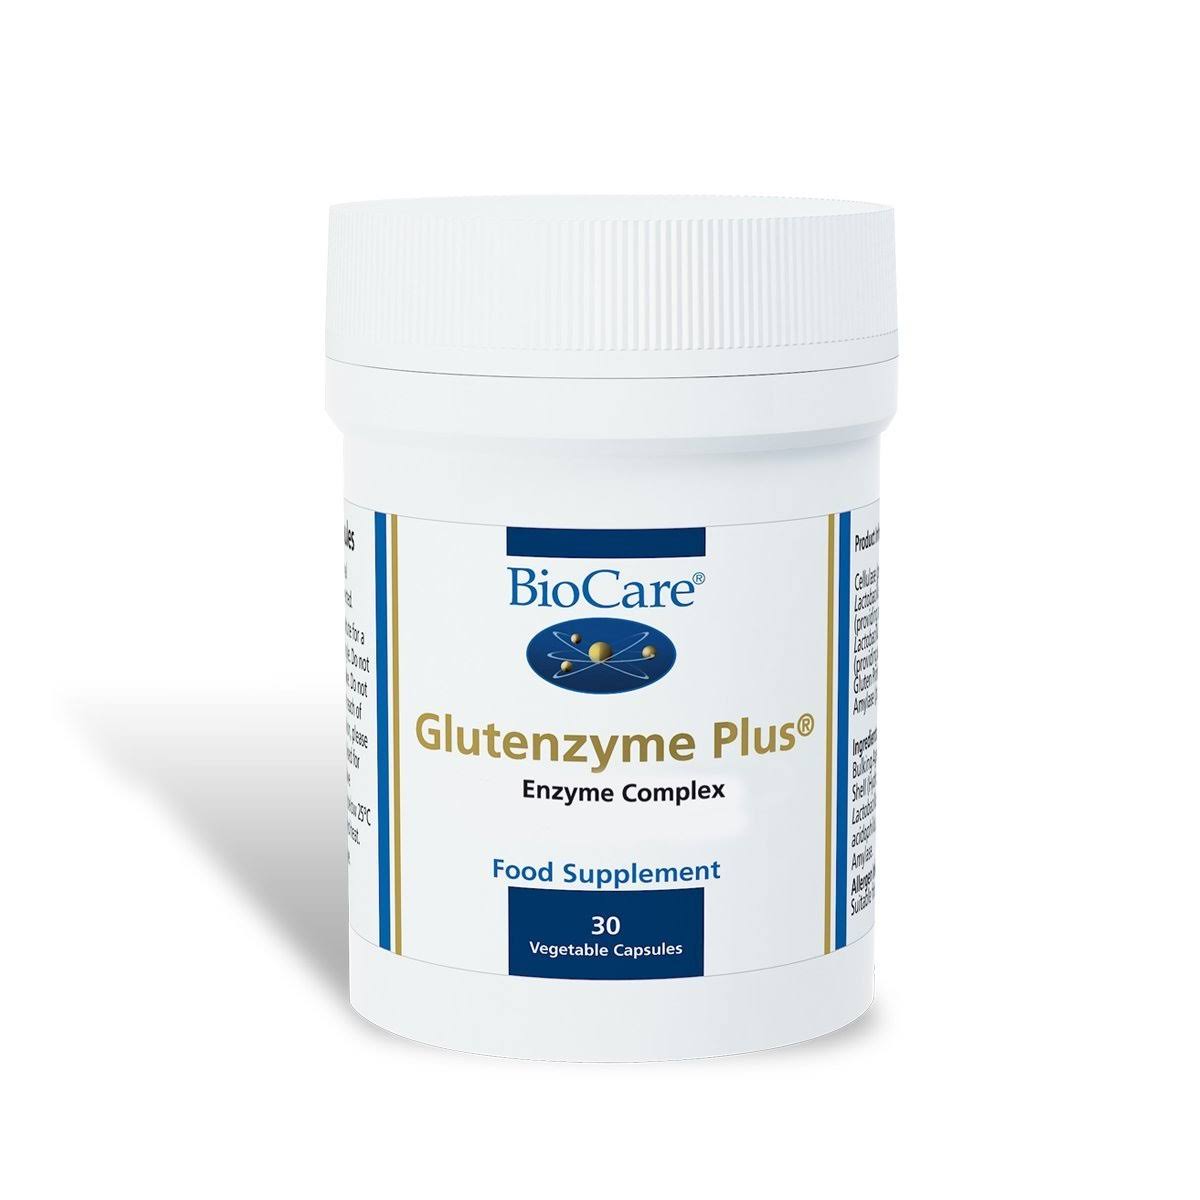 BioCare Glutenzyme Plus Food Supplement - 30 Capsules